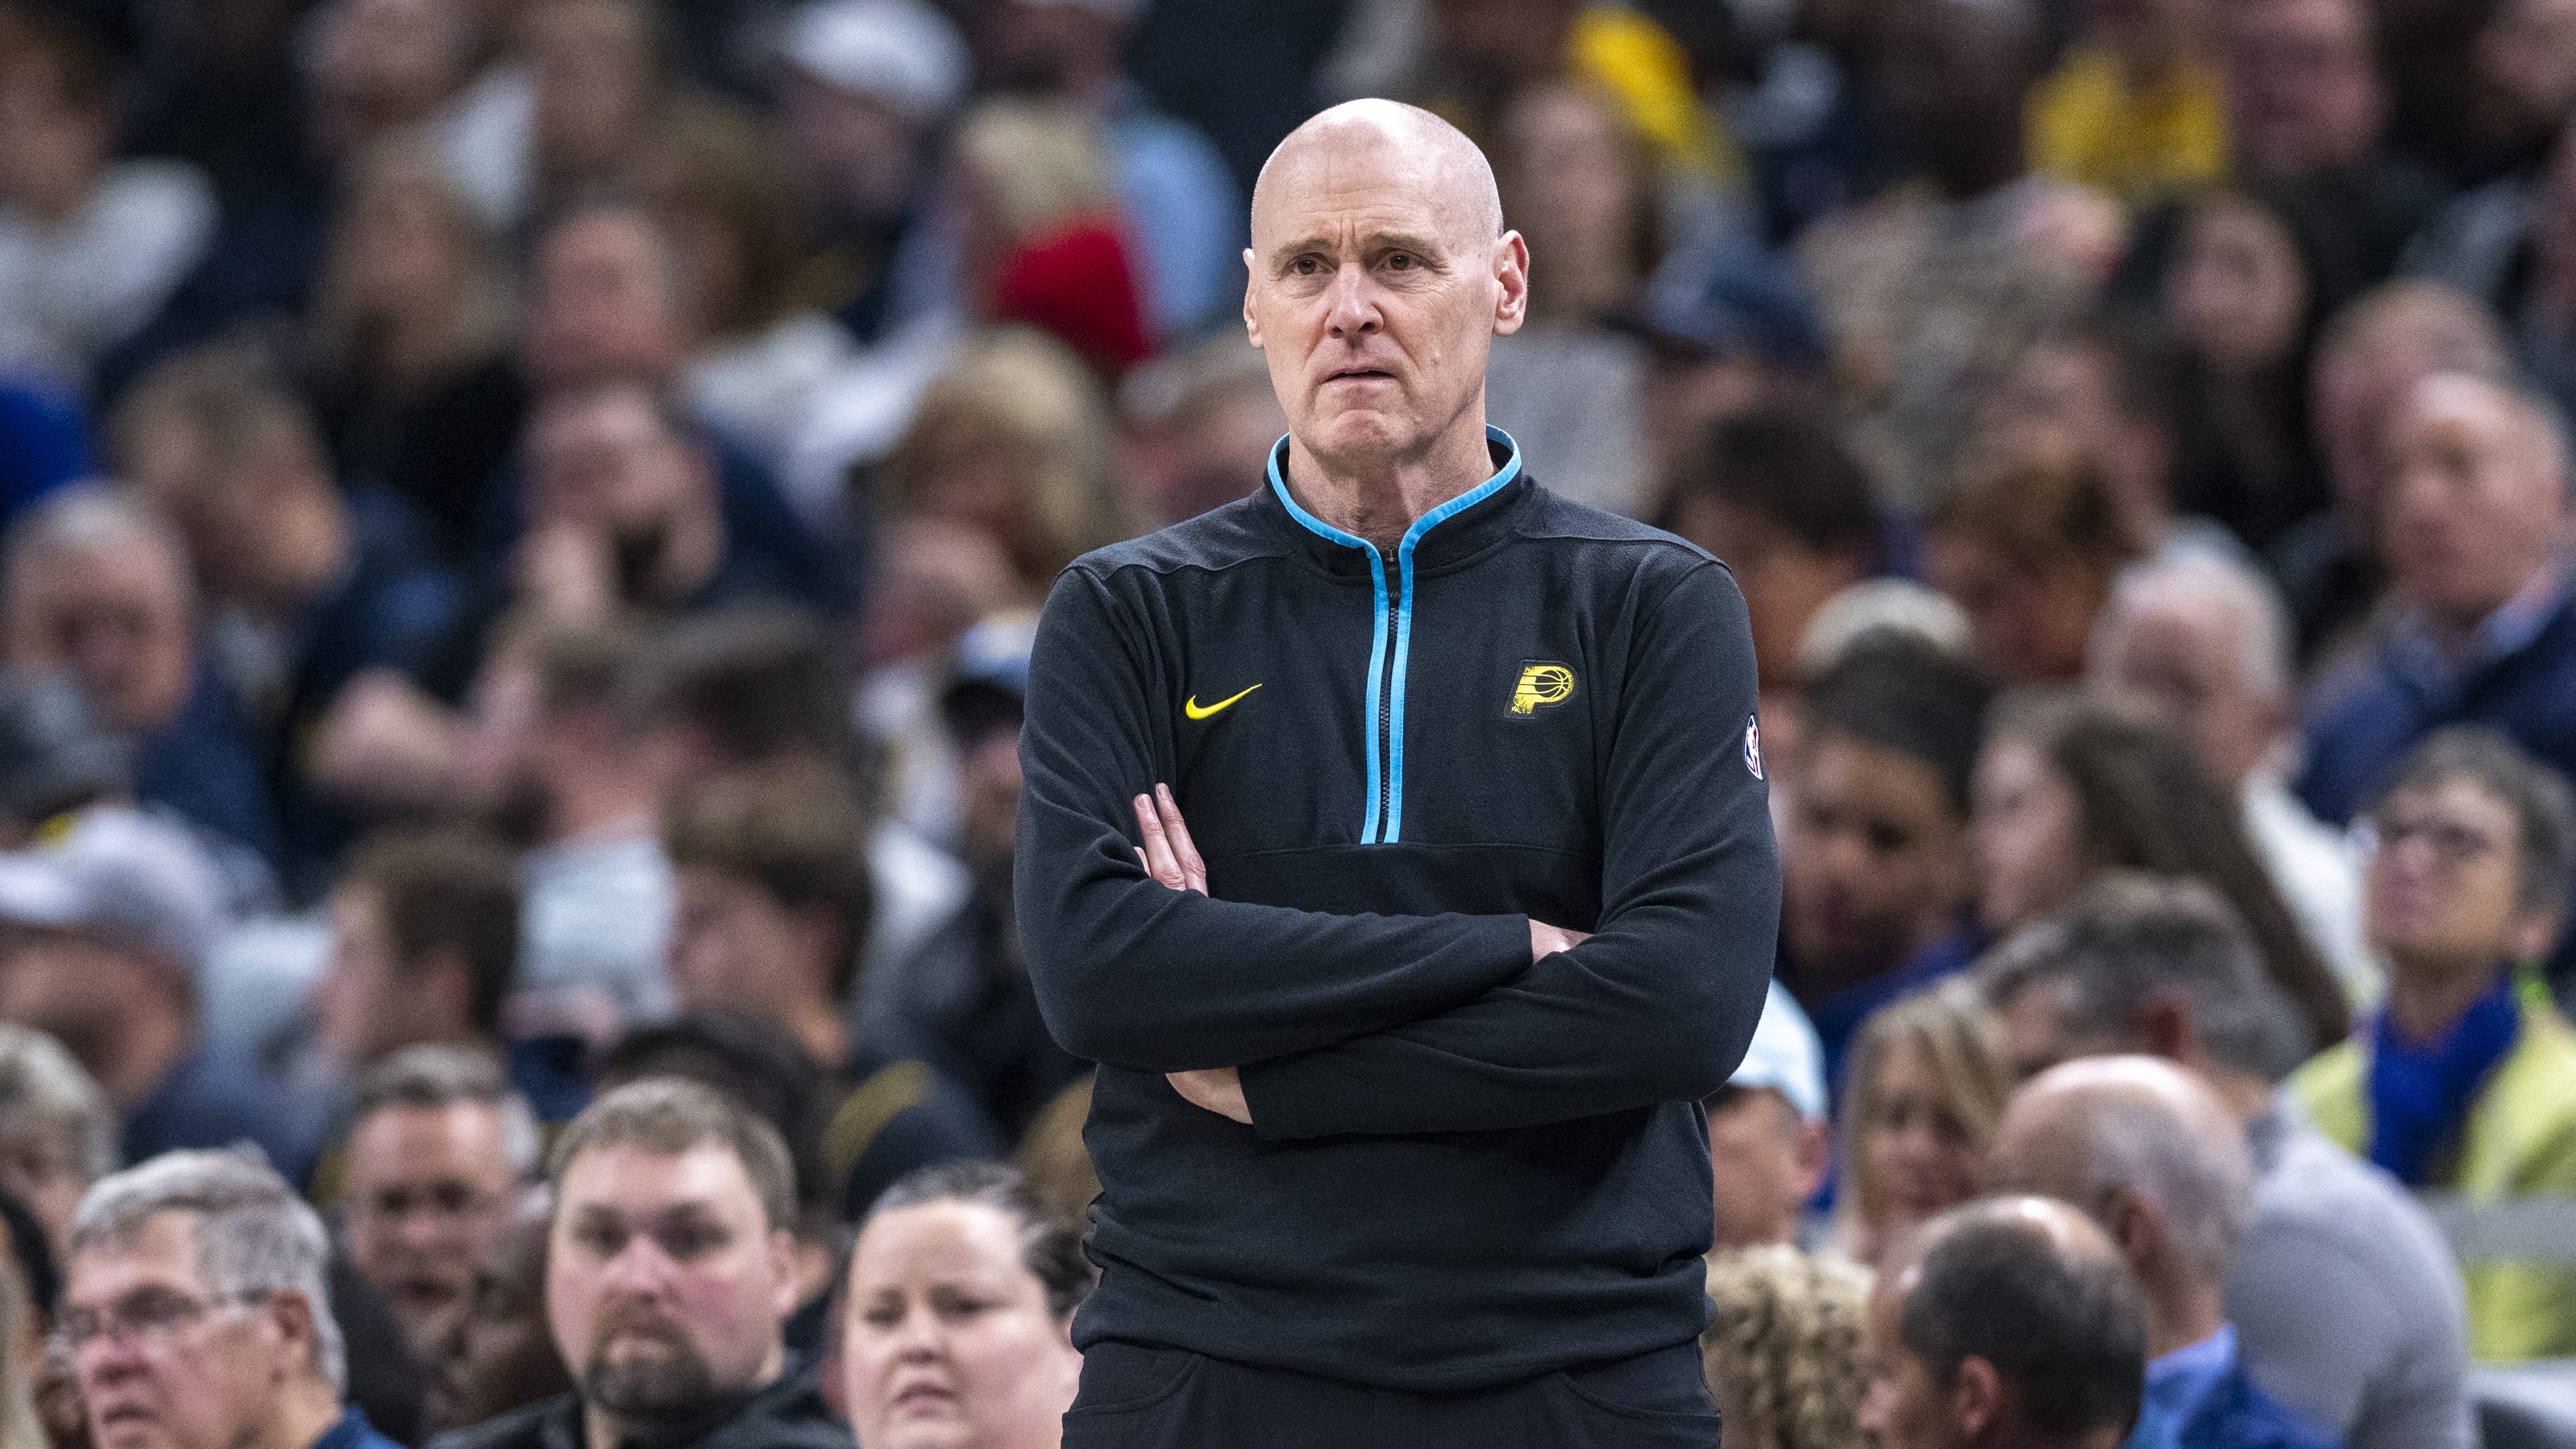 Pacers coach Rick Carlisle discusses the Pacers' preparations for the Milwaukee series